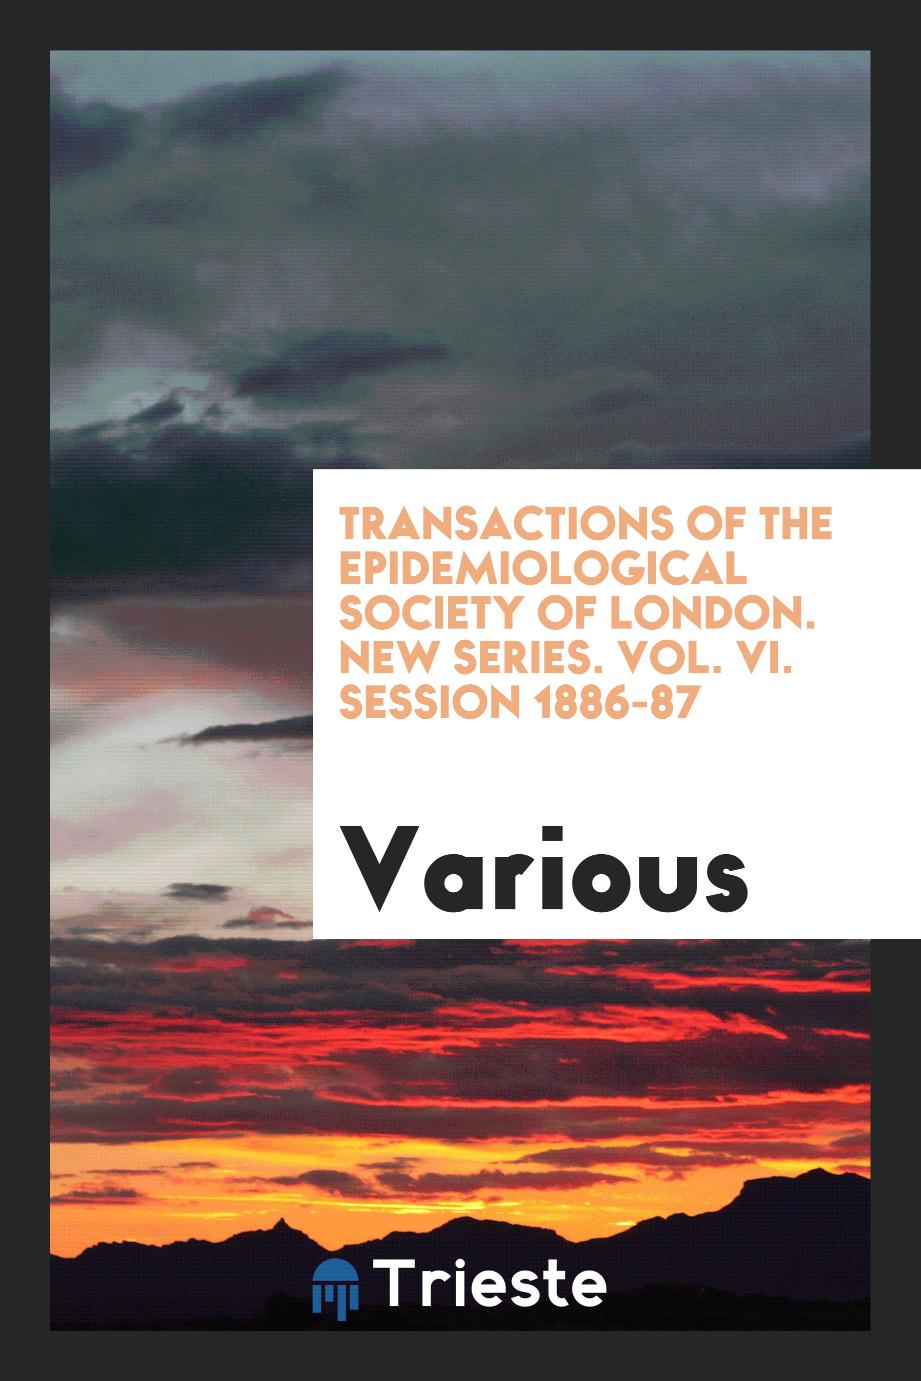 Transactions of the Epidemiological Society of London. New Series. Vol. VI. Session 1886-87